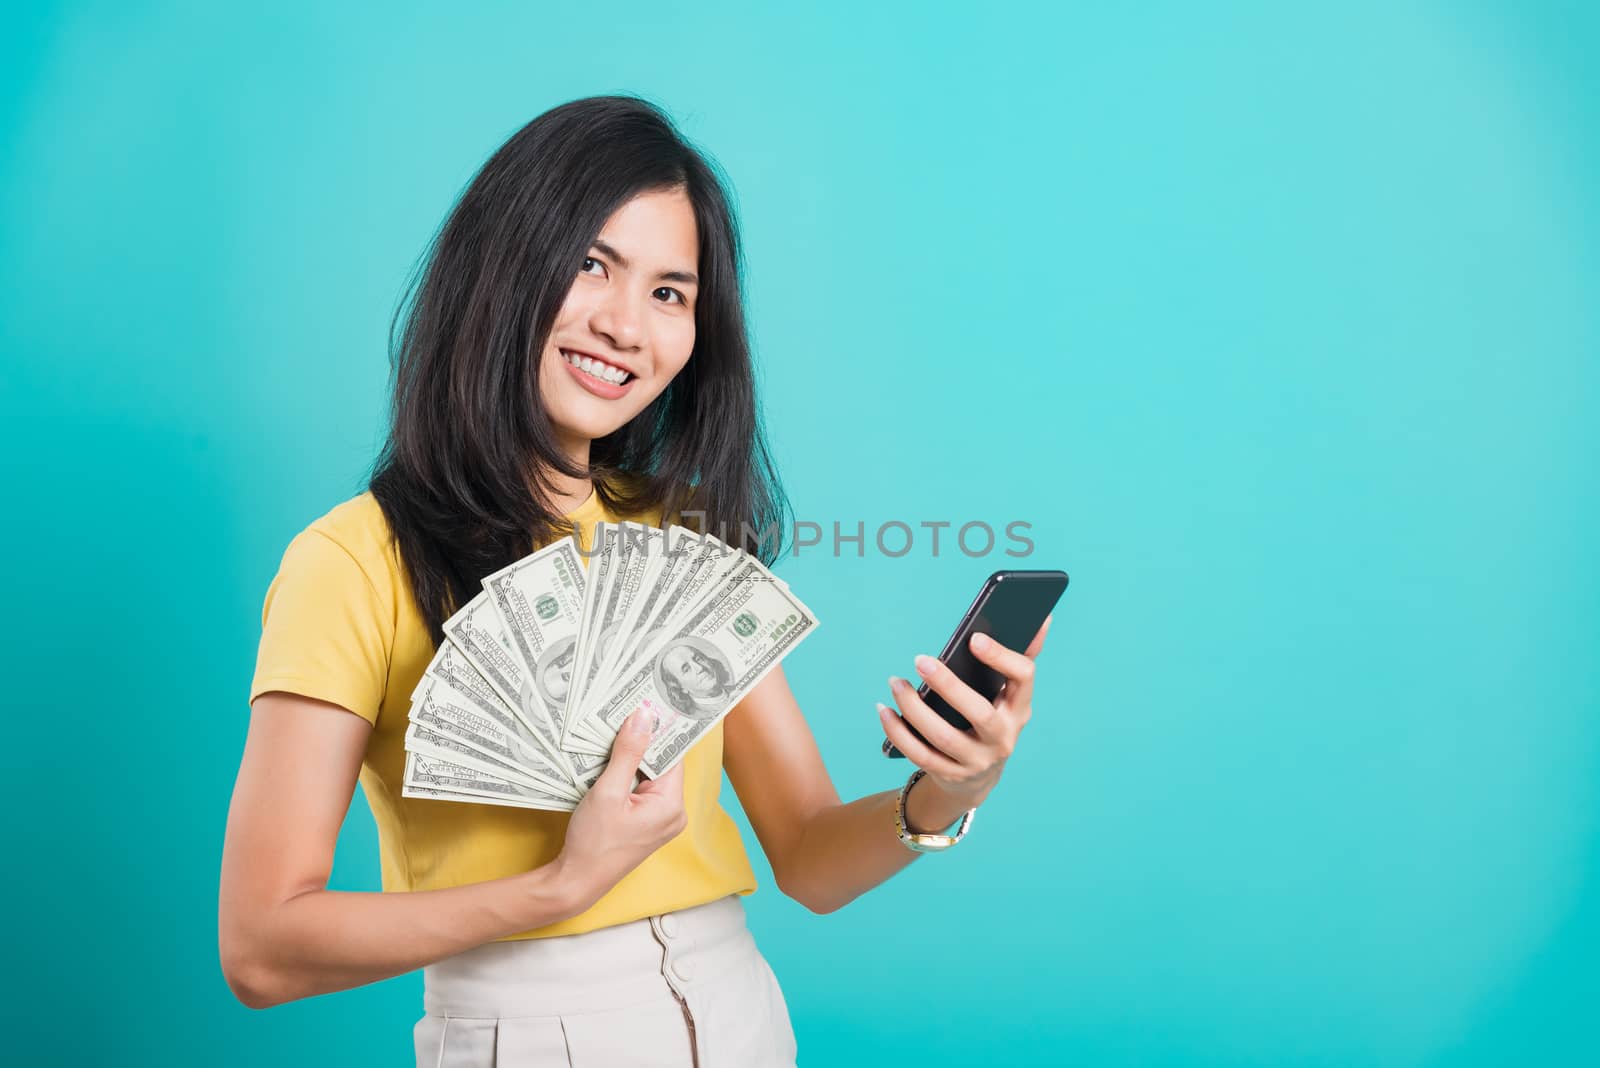 Asian happy portrait beautiful young woman standing wear t-shirt smile holding money fan banknotes 100 dollar bills using mobile phone and looking to camera on blue background with copy space for text